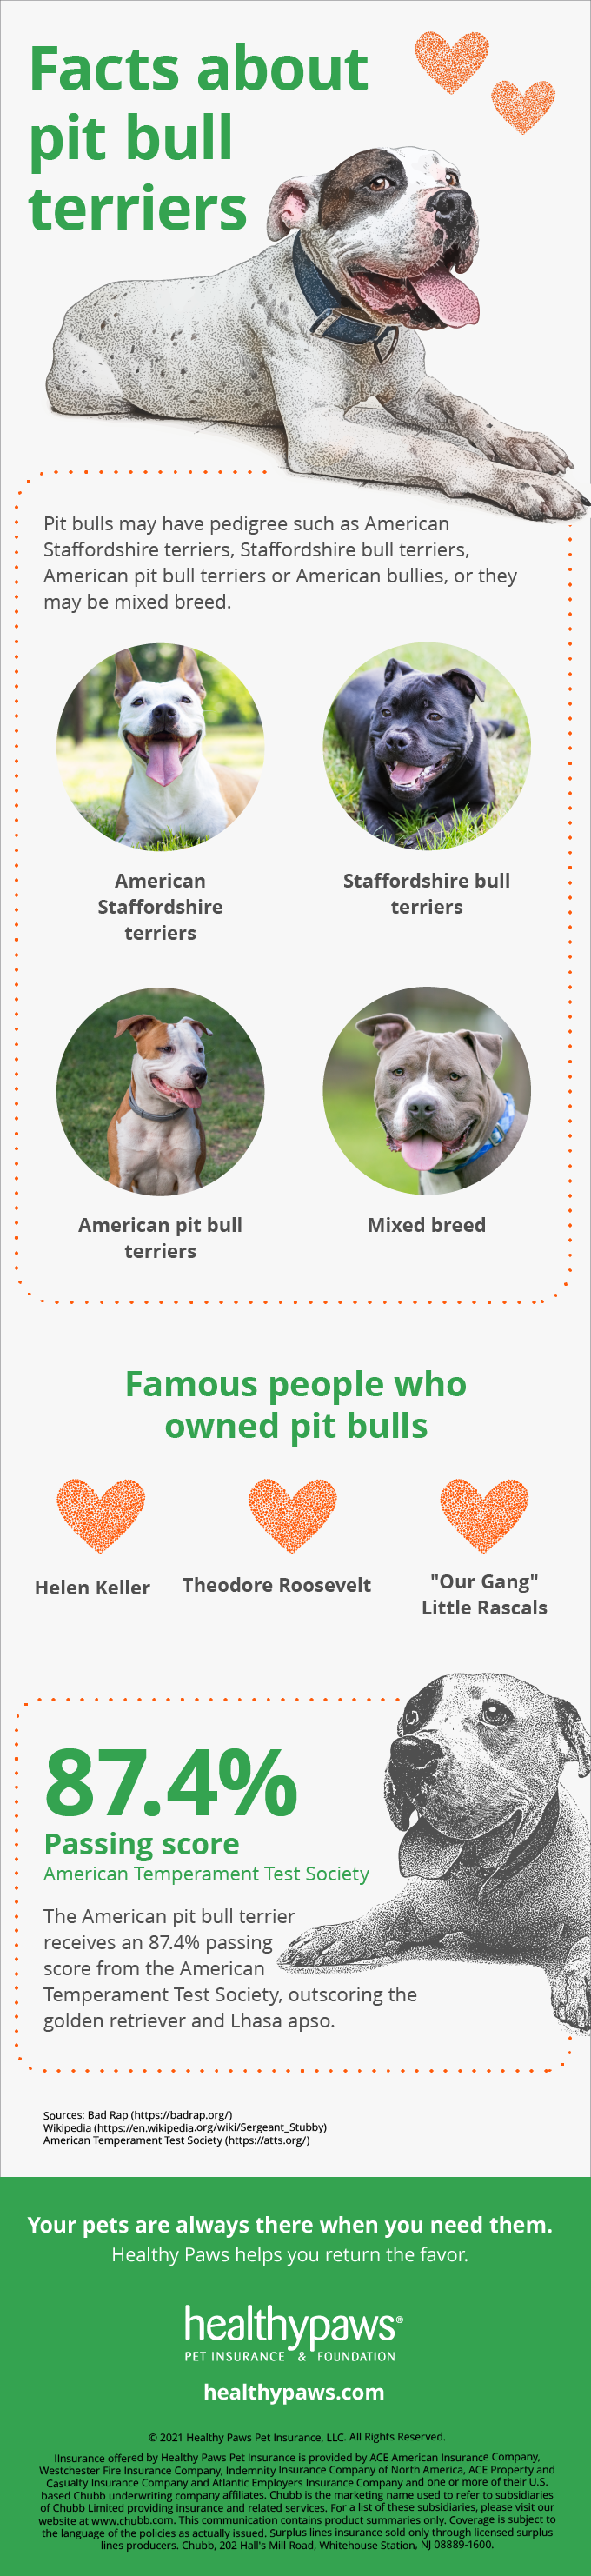 Infographic about pit bull dogs